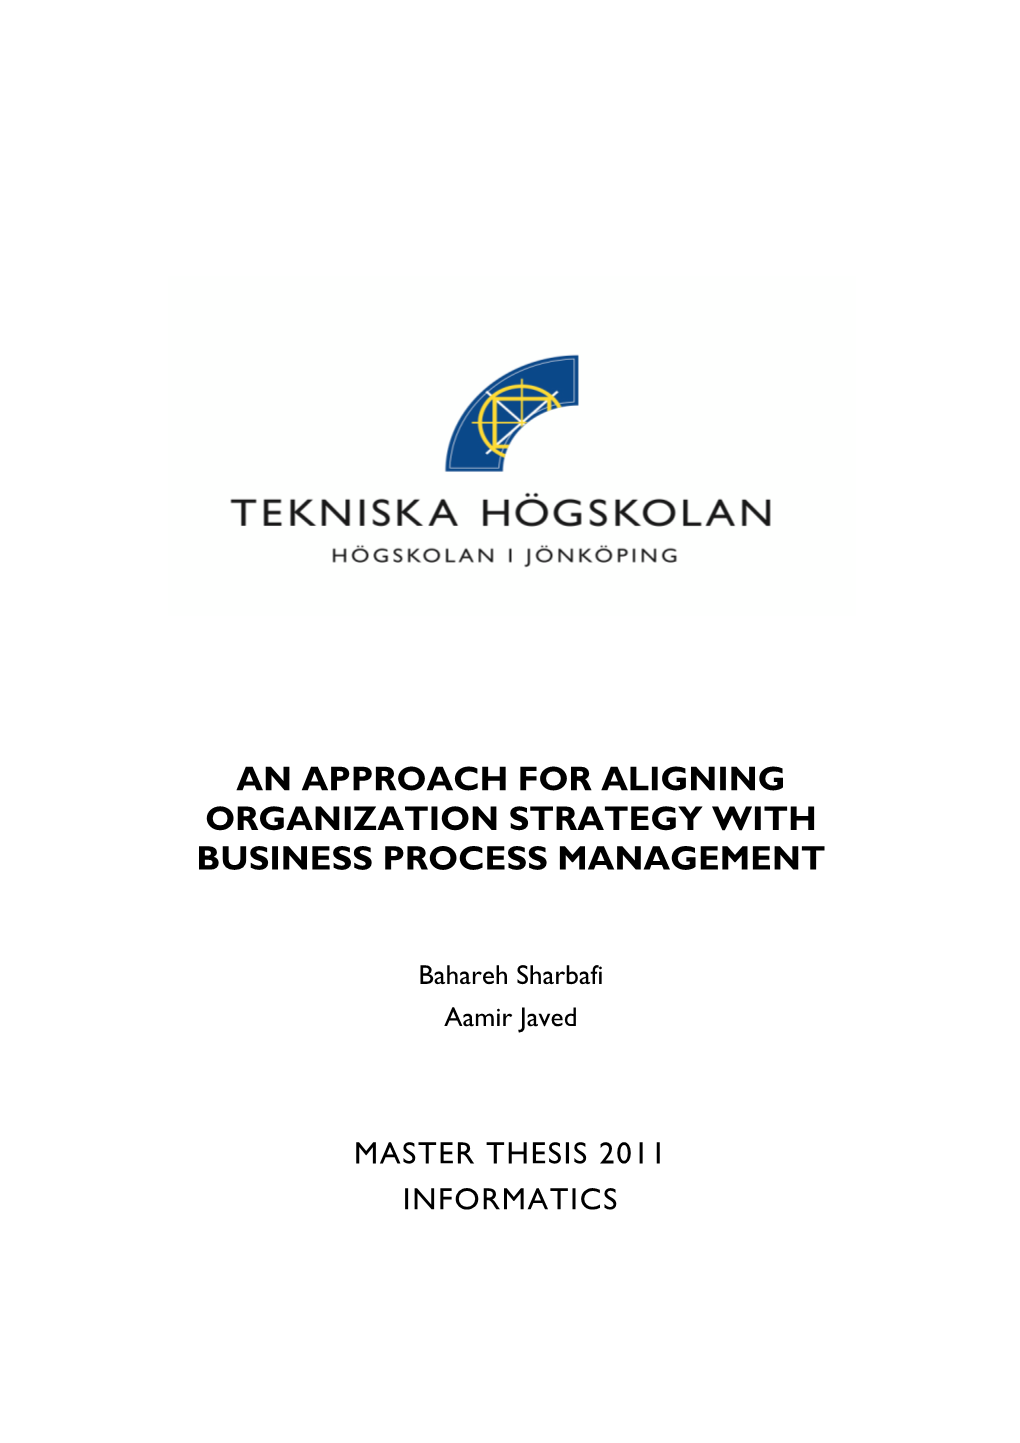 An Approach for Aligning Organization Strategy with Business Process Management